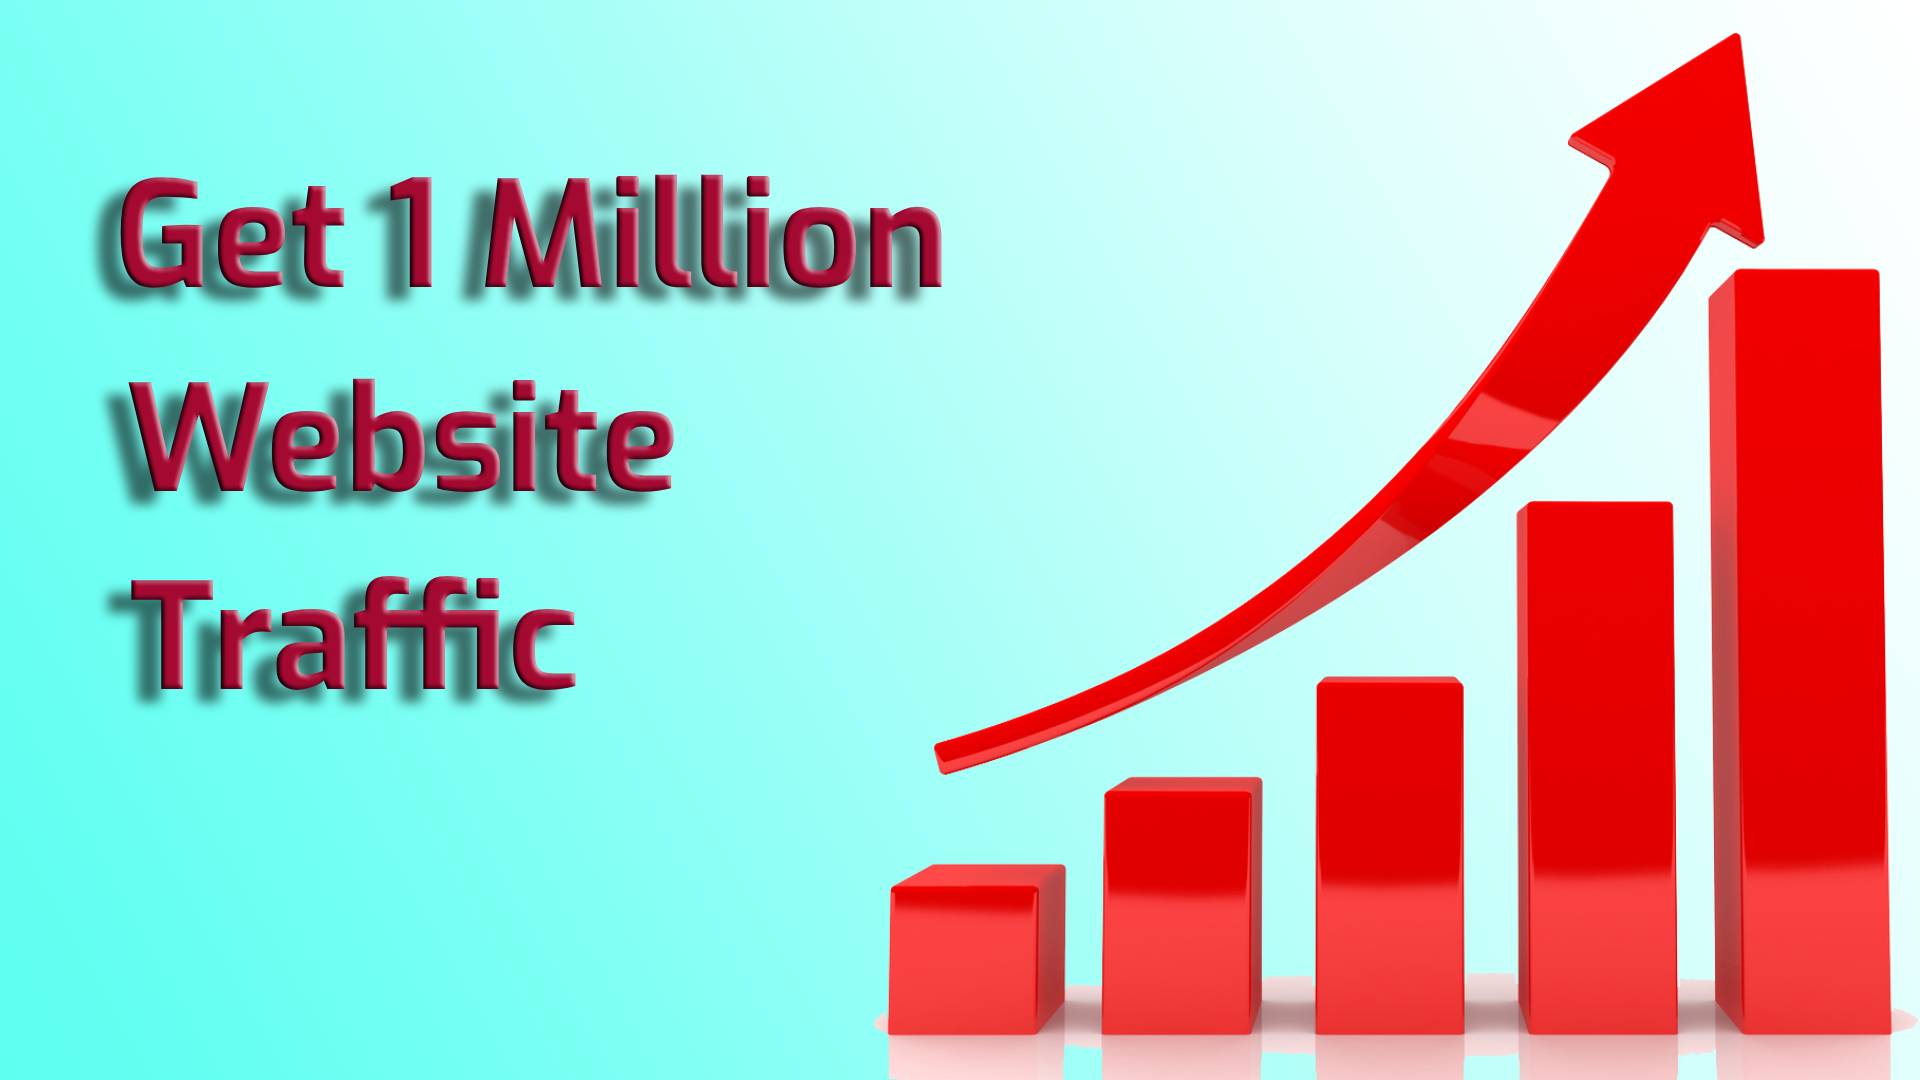 How to get 1 million traffic on website